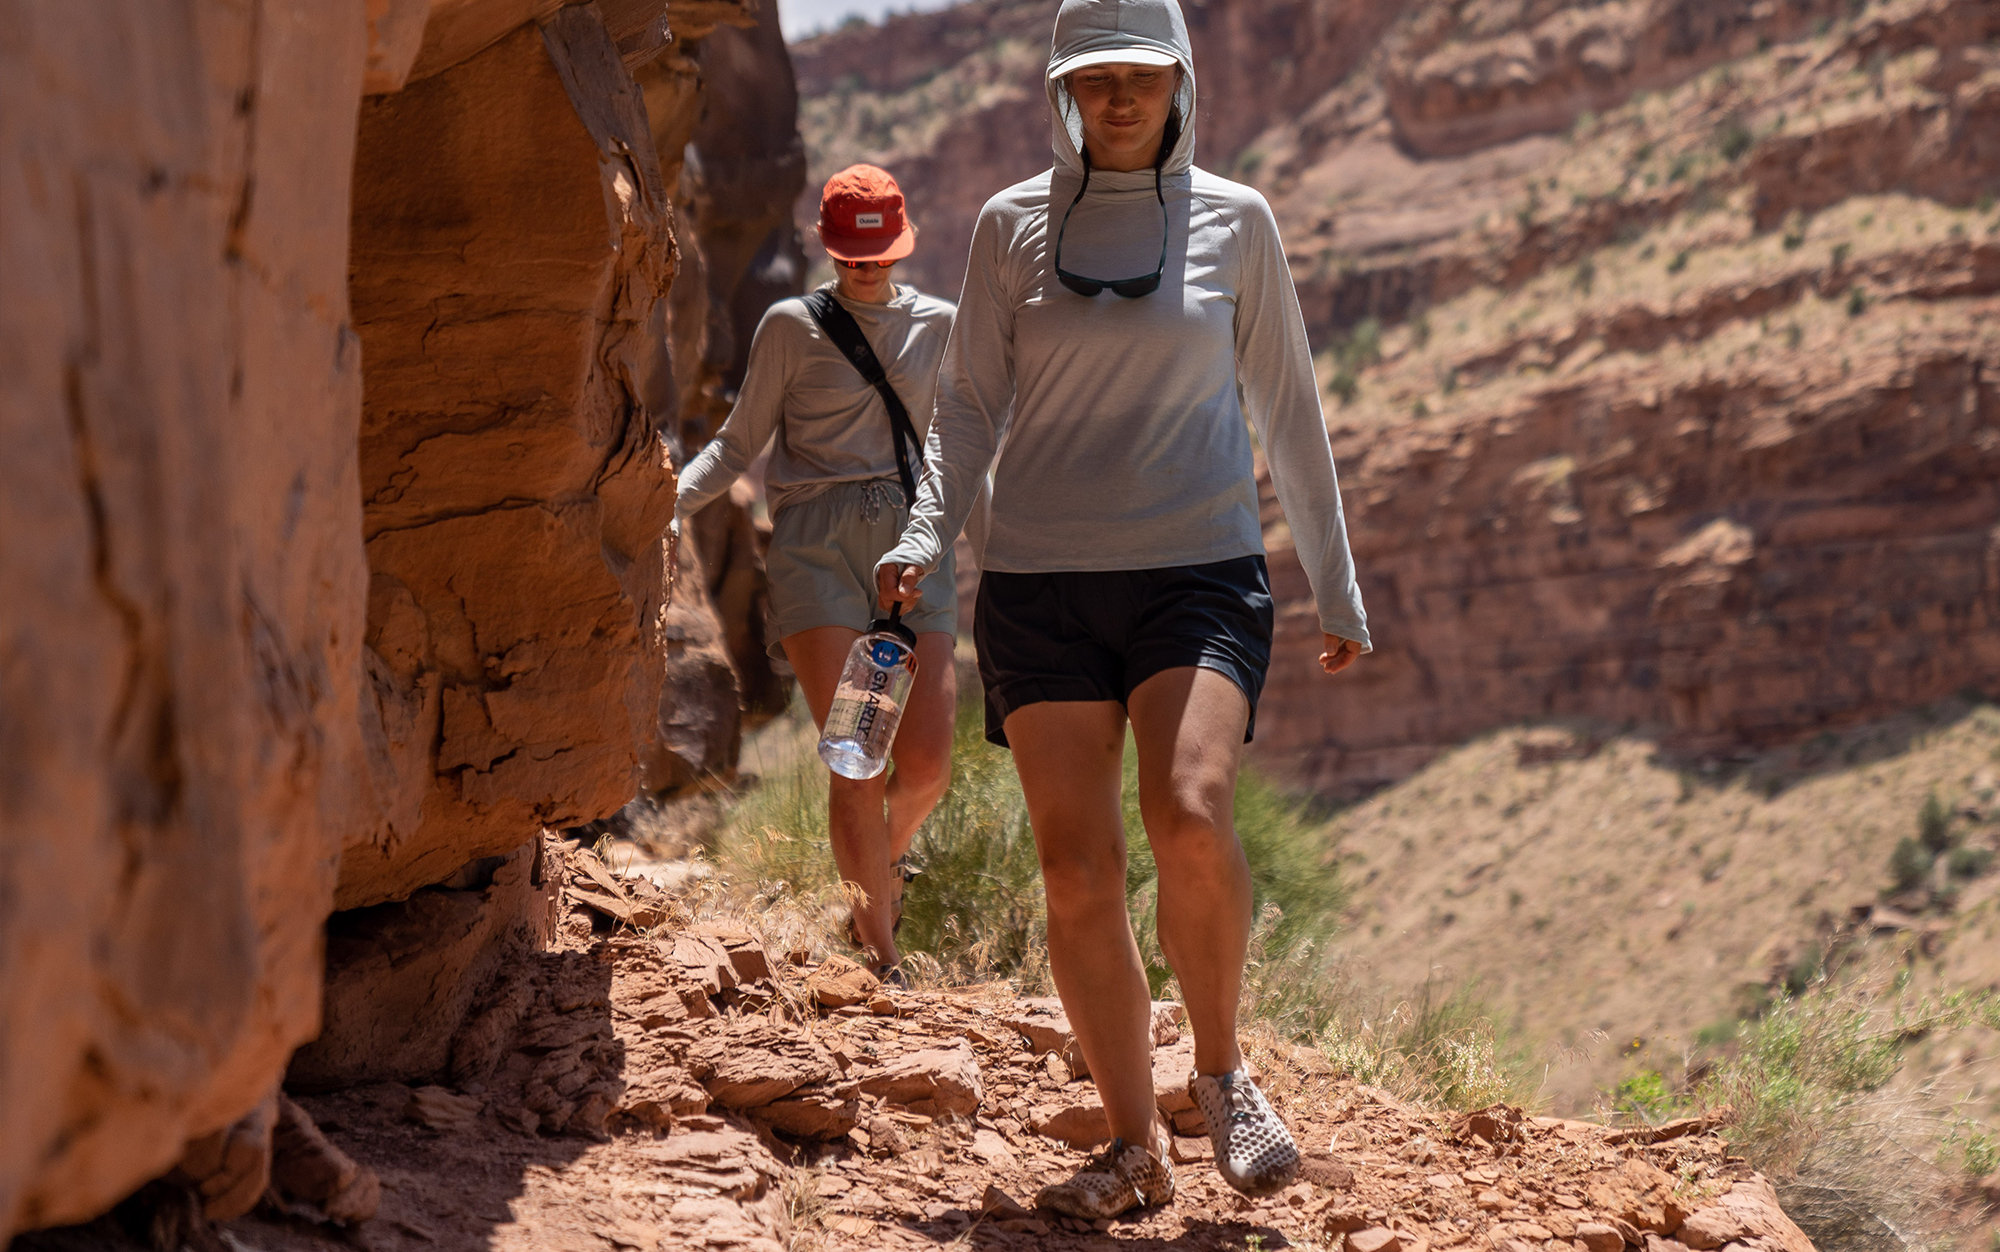 The Vivobarefoot Ultra III Bloom worked great on a short hike up a side canyon while rafting down the Colorado River.